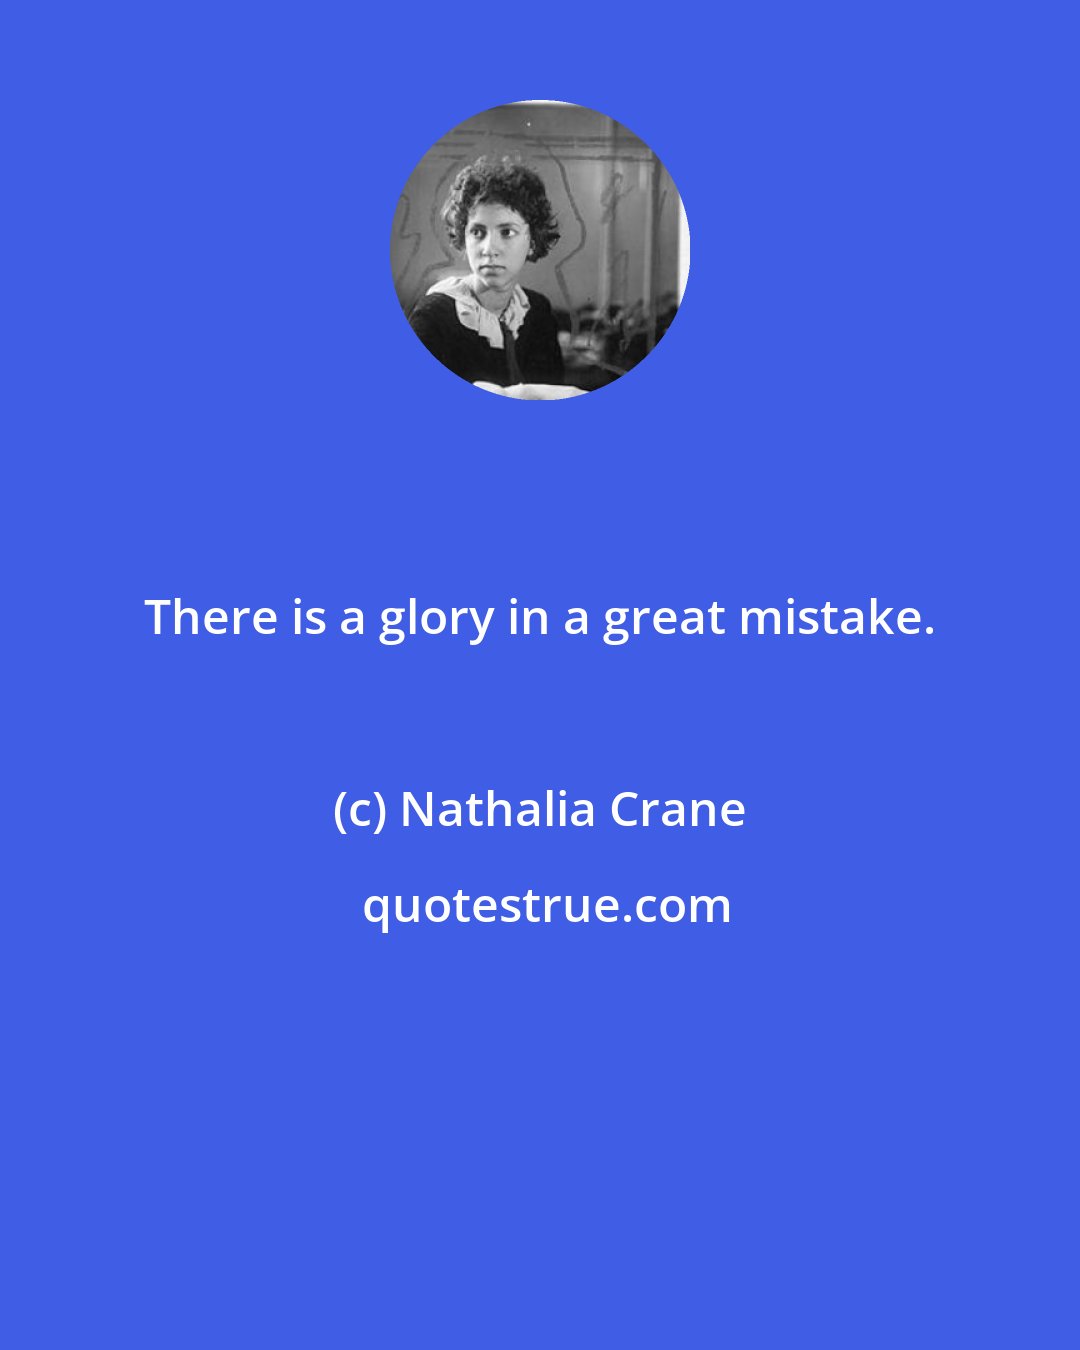 Nathalia Crane: There is a glory in a great mistake.